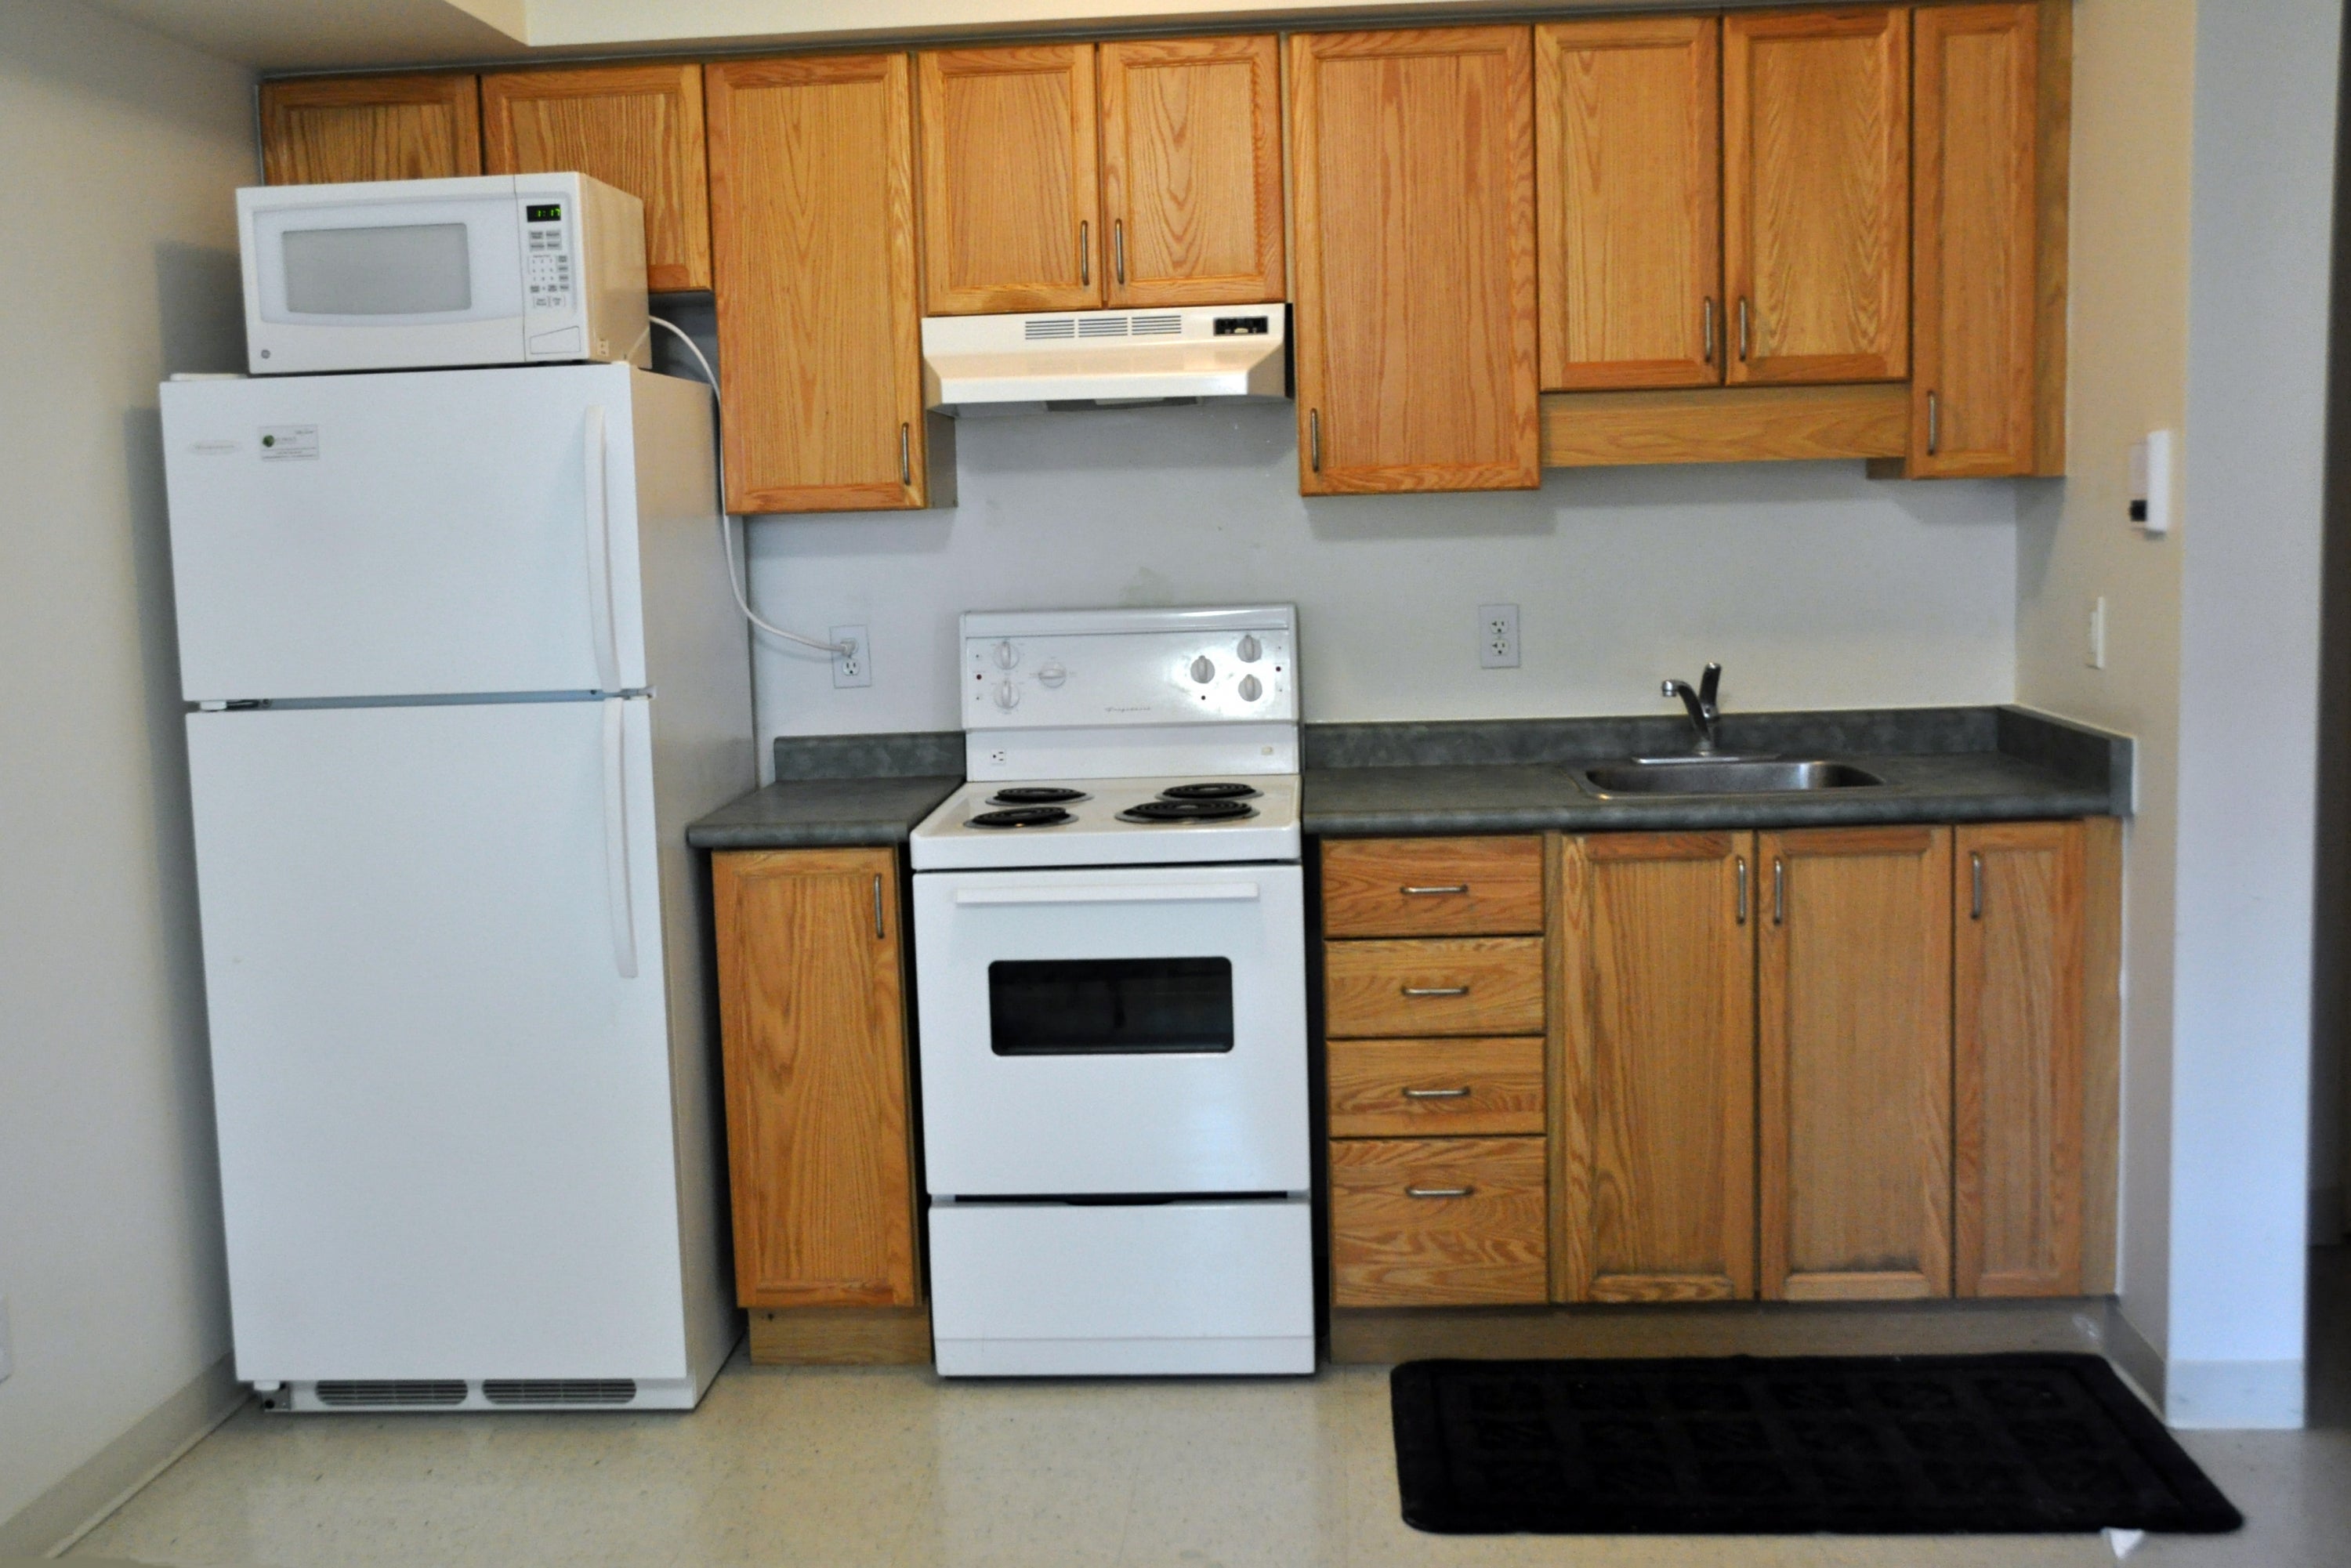 A photo of a typical kitchen, with fridge, stove and sink